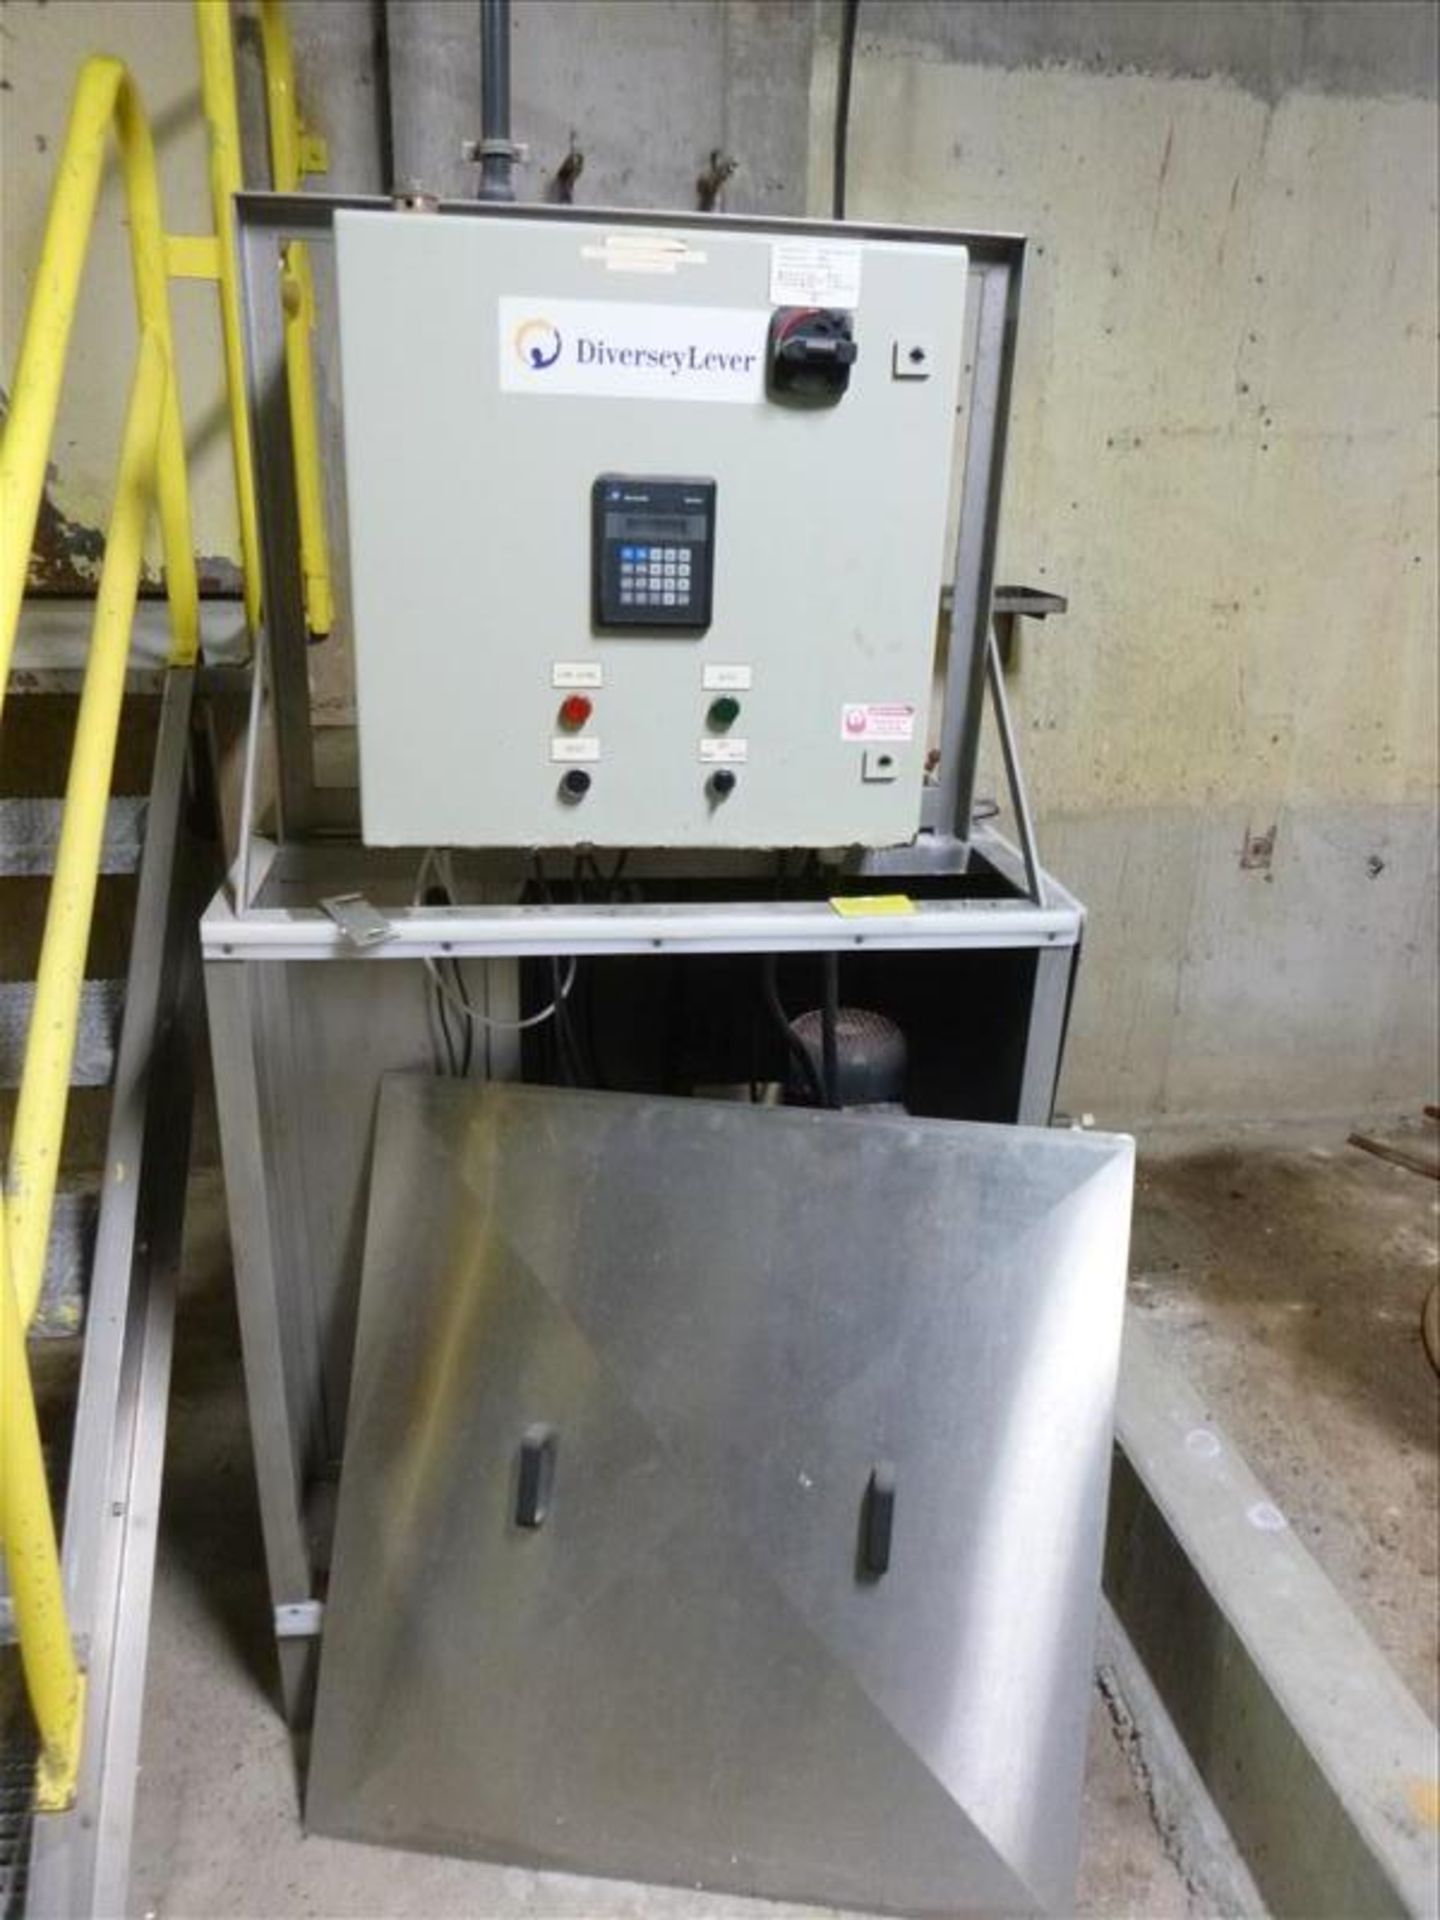 DiverseyLever central foam system c/w poly tank (further processing, basement)